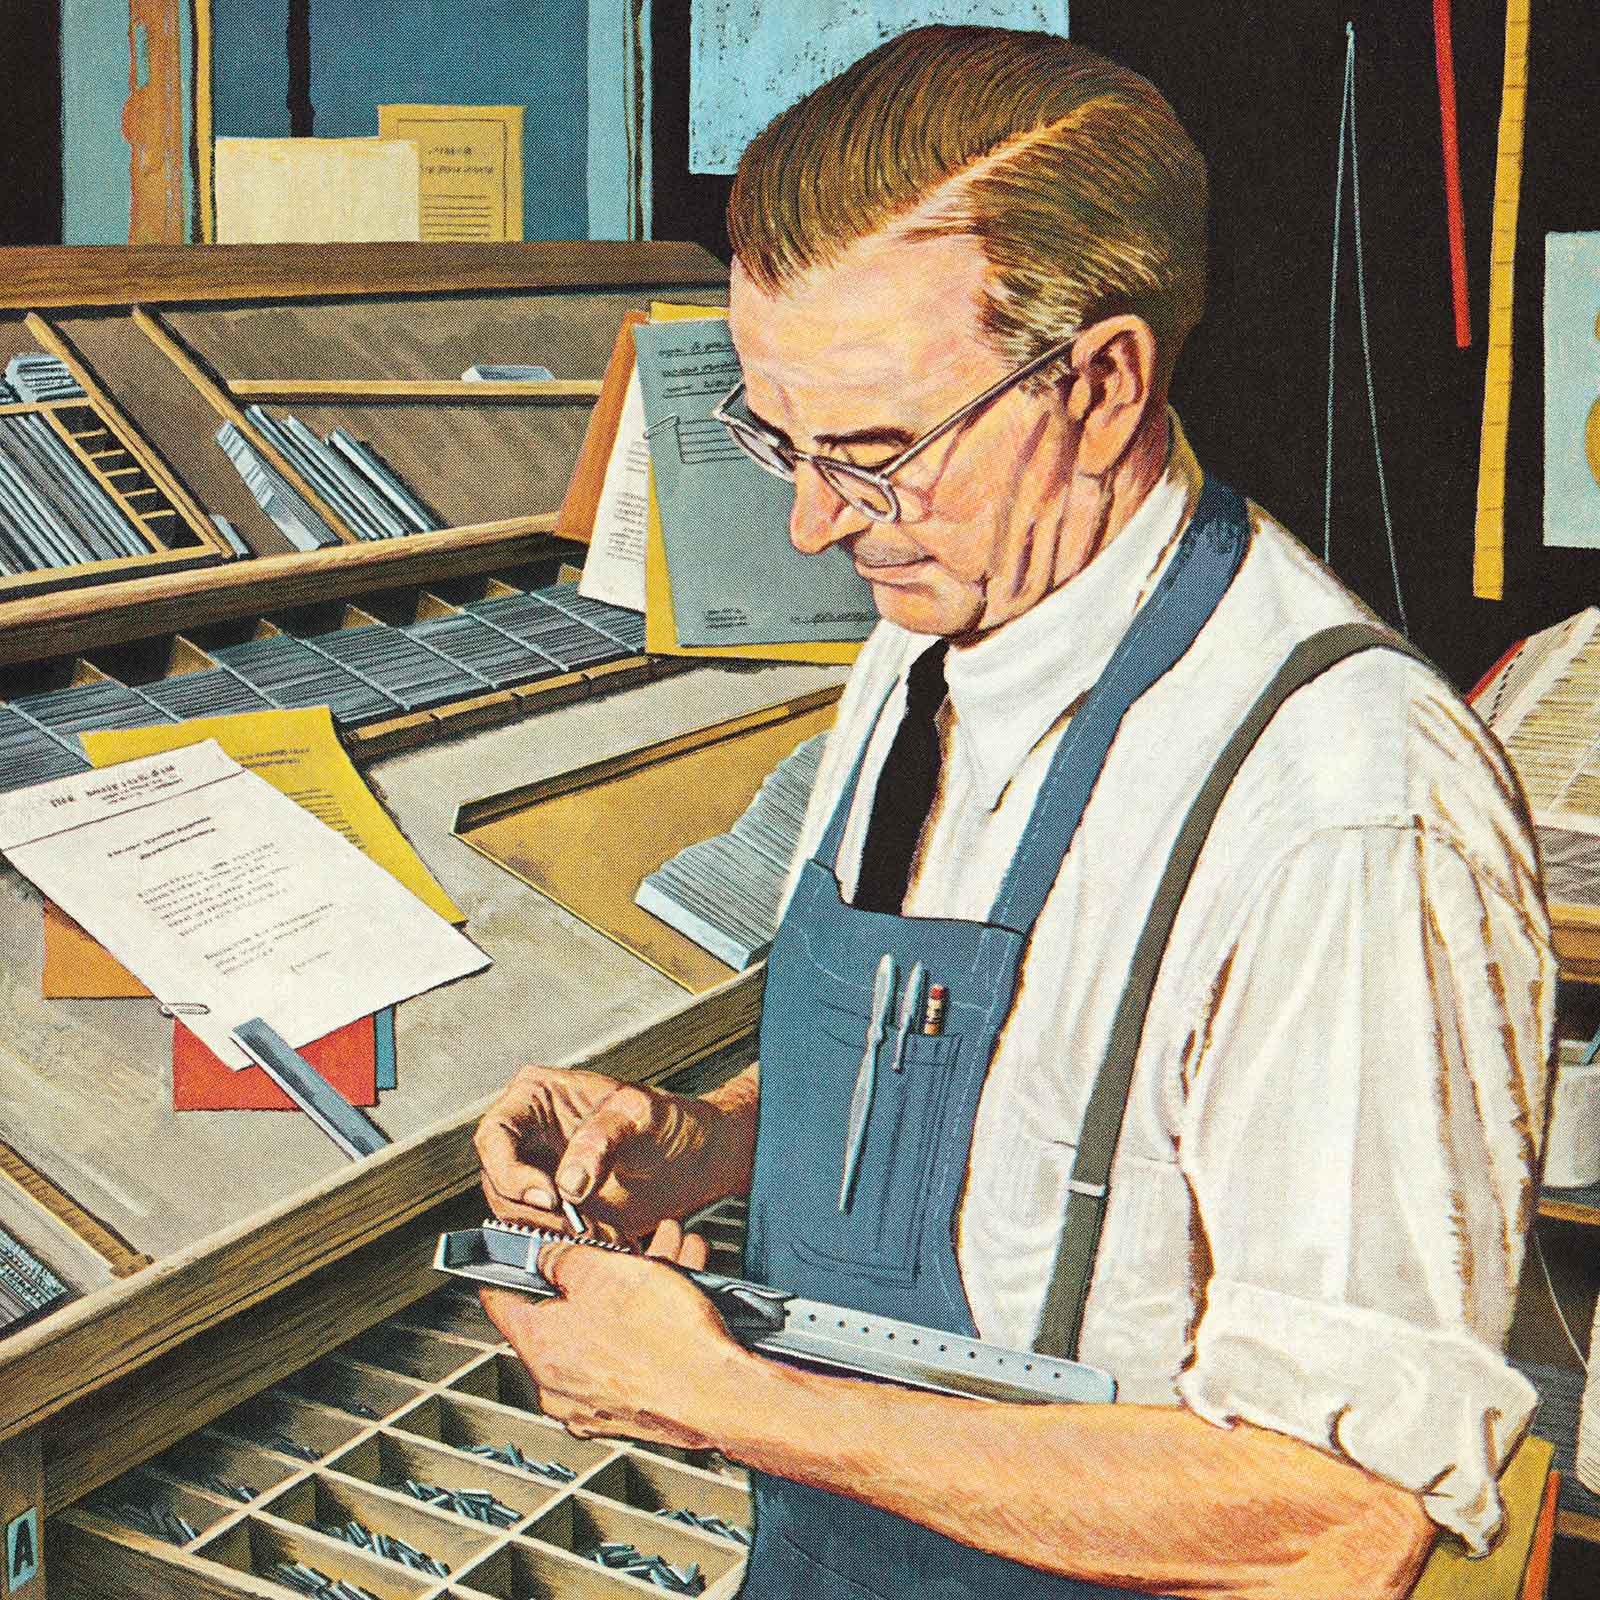 A beautiful old image of an old-fashioned typesetter at work, putting the letters into place so he can print something - symbolising our blog.